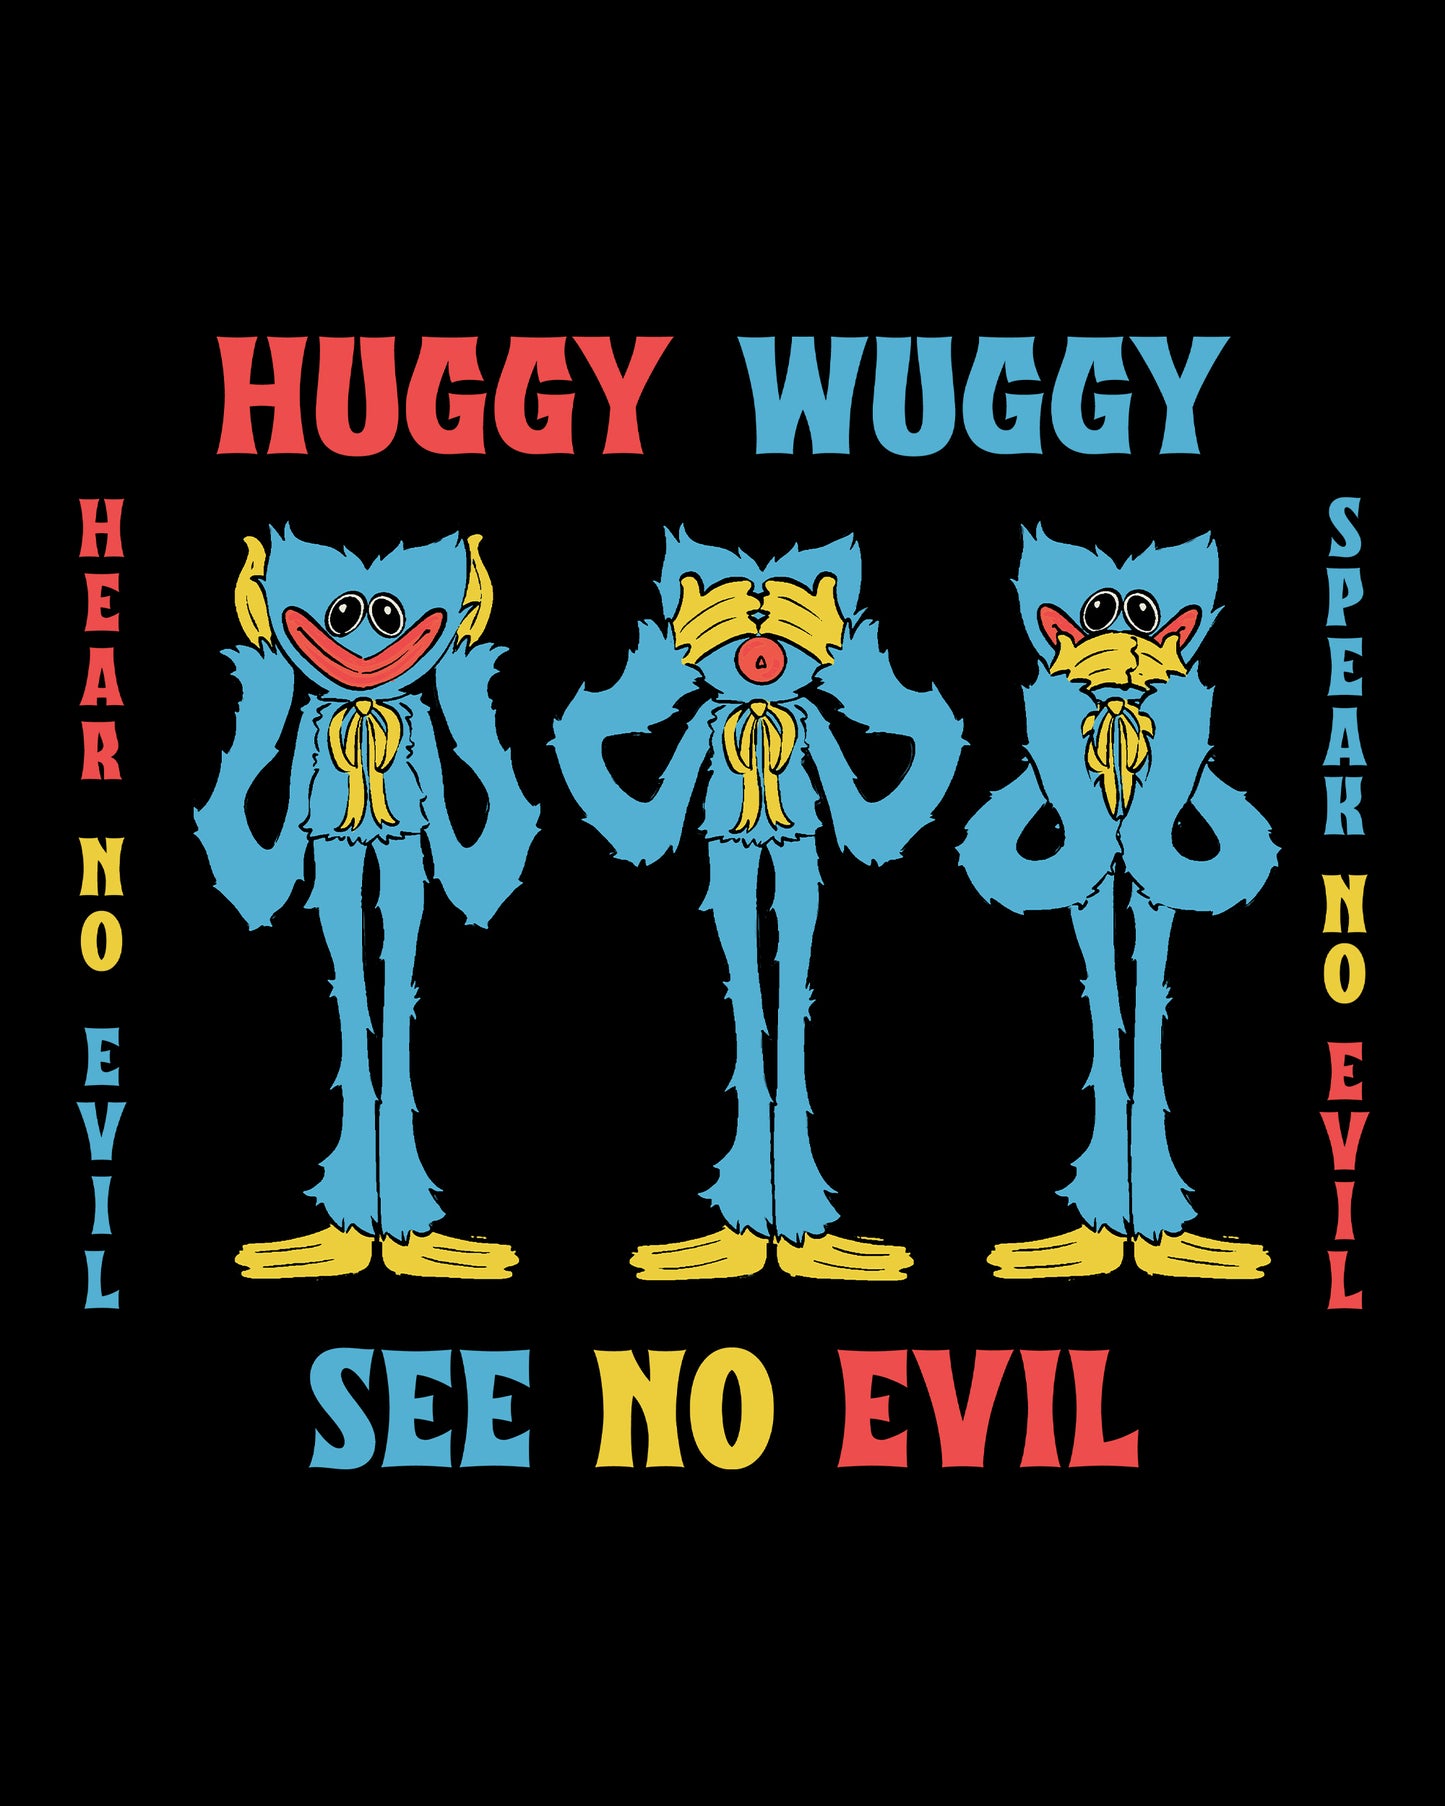 image on shirt: 3 different huggy wuggy. one with hands covering ears. one with hands covering eyes. one with hands covering mouth. text: huggy wuggy hear no evil see no evil speak no evil.